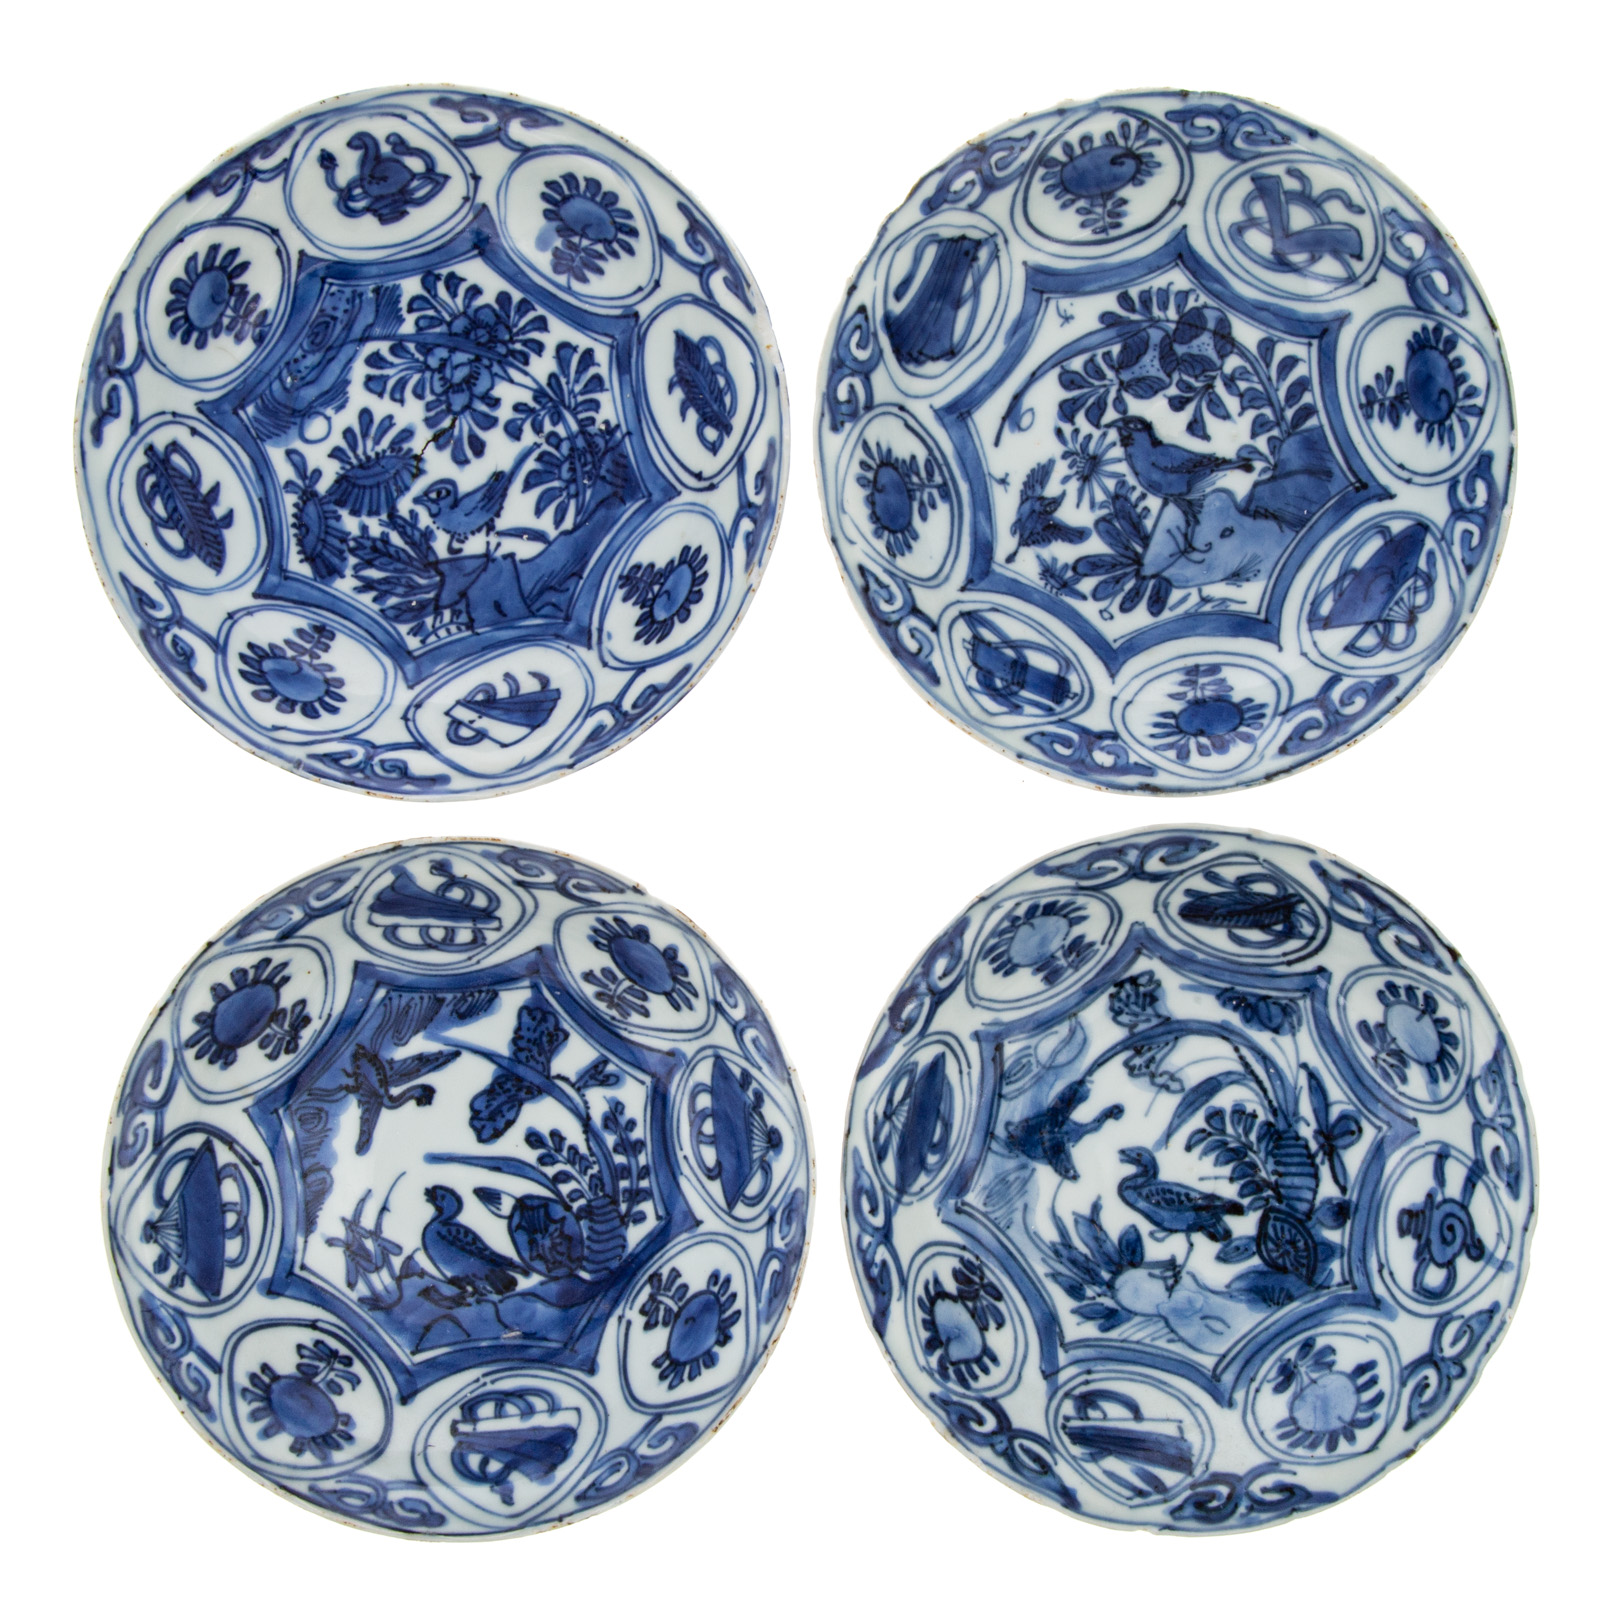 FOUR CHINESE EXPORT KRAAK BOWLS 36a651